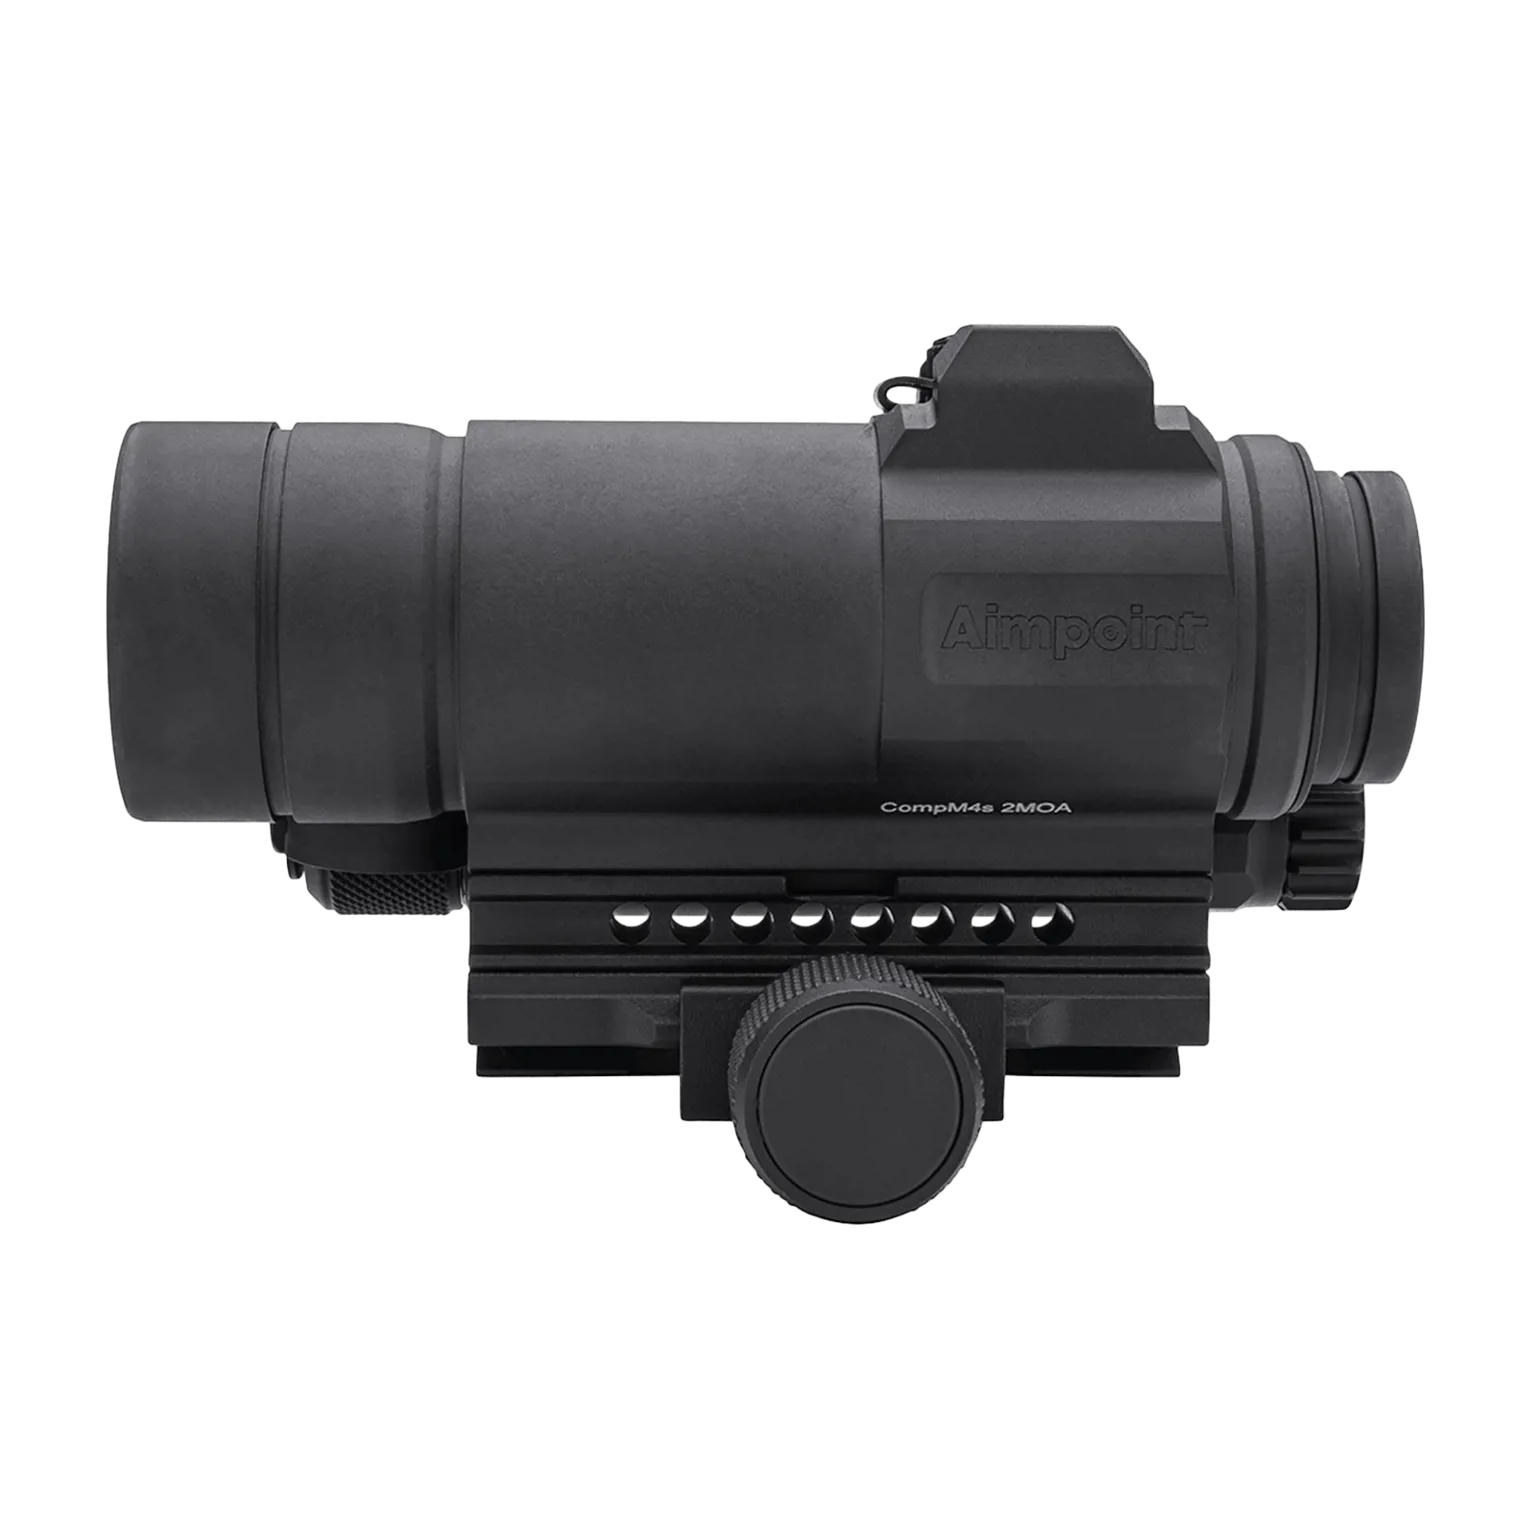 Aimpoint CompM4 & CompM4s 2 MOA Red Dot Sight Without Mount